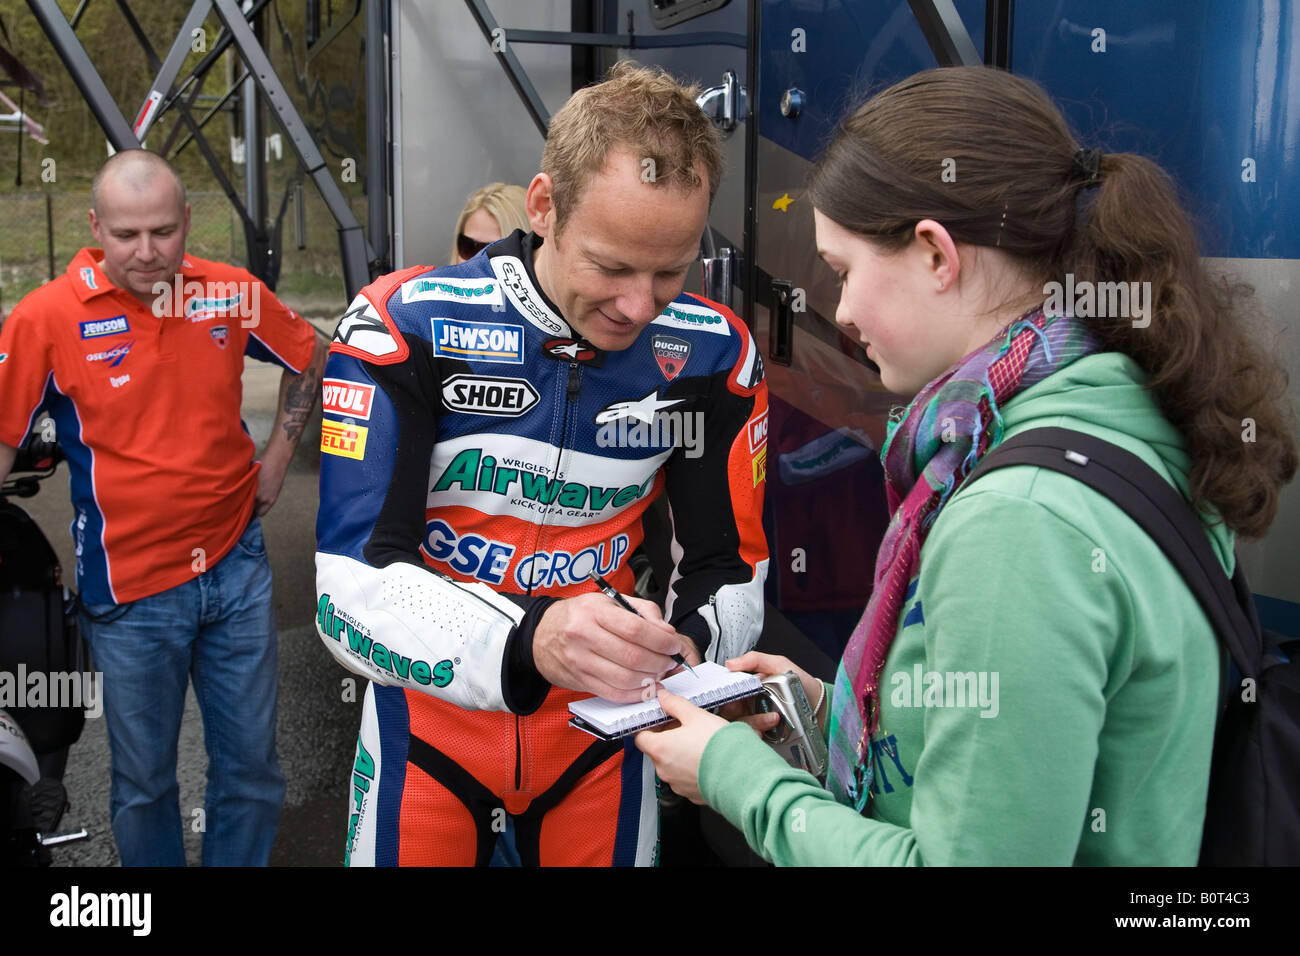 Shane Byrne signing autographs in the paddock during free practice for the BSB Championship at Brands Hatch, Kent, England. Stock Photo